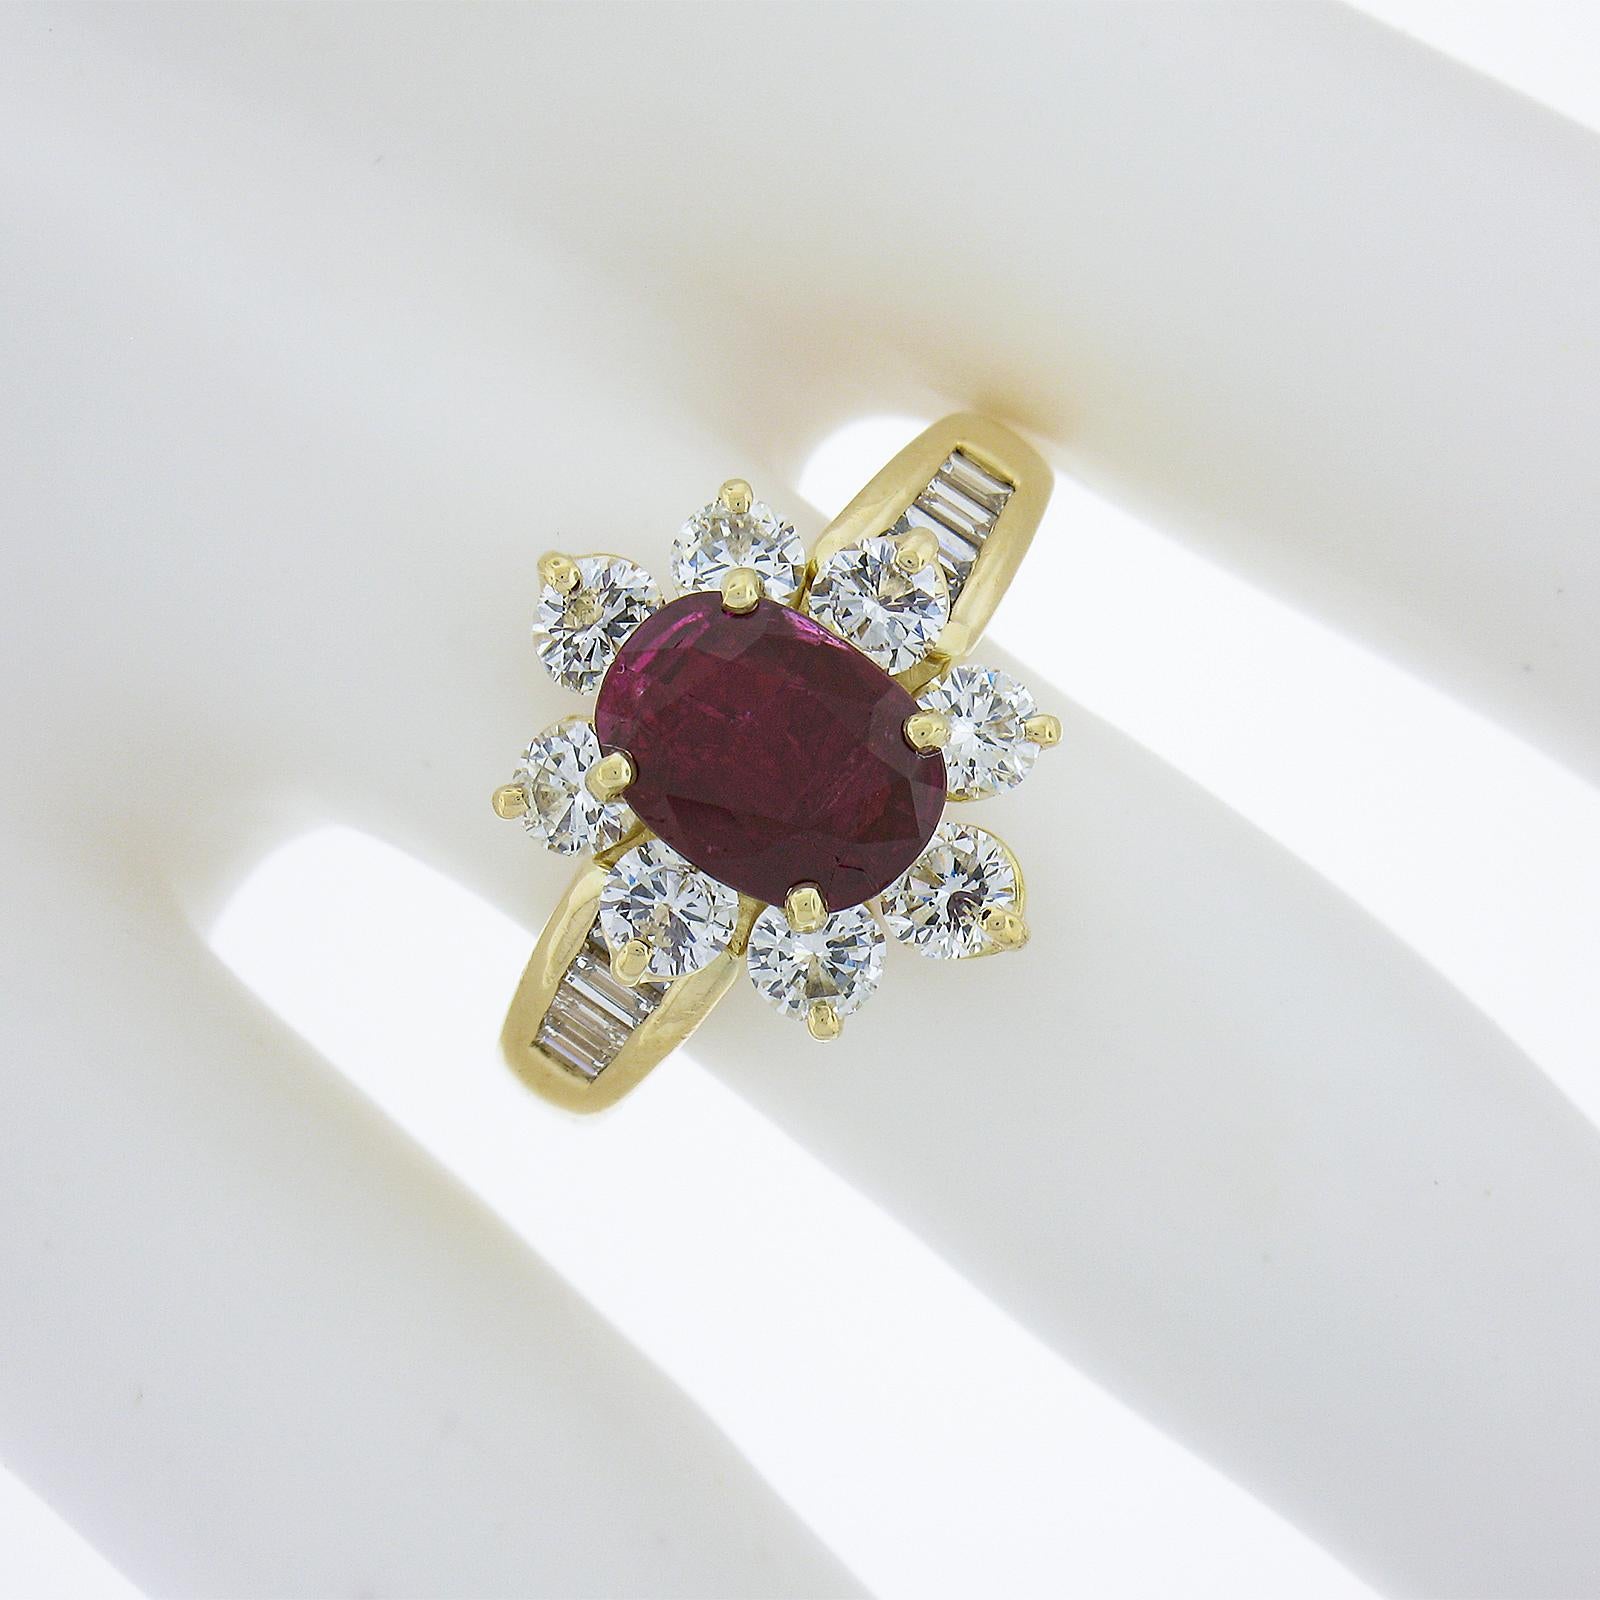 Oval Cut French 18k Gold 3.51ctw GIA NO HEAT Oval Vivid Red Ruby Diamond Flower Halo Ring